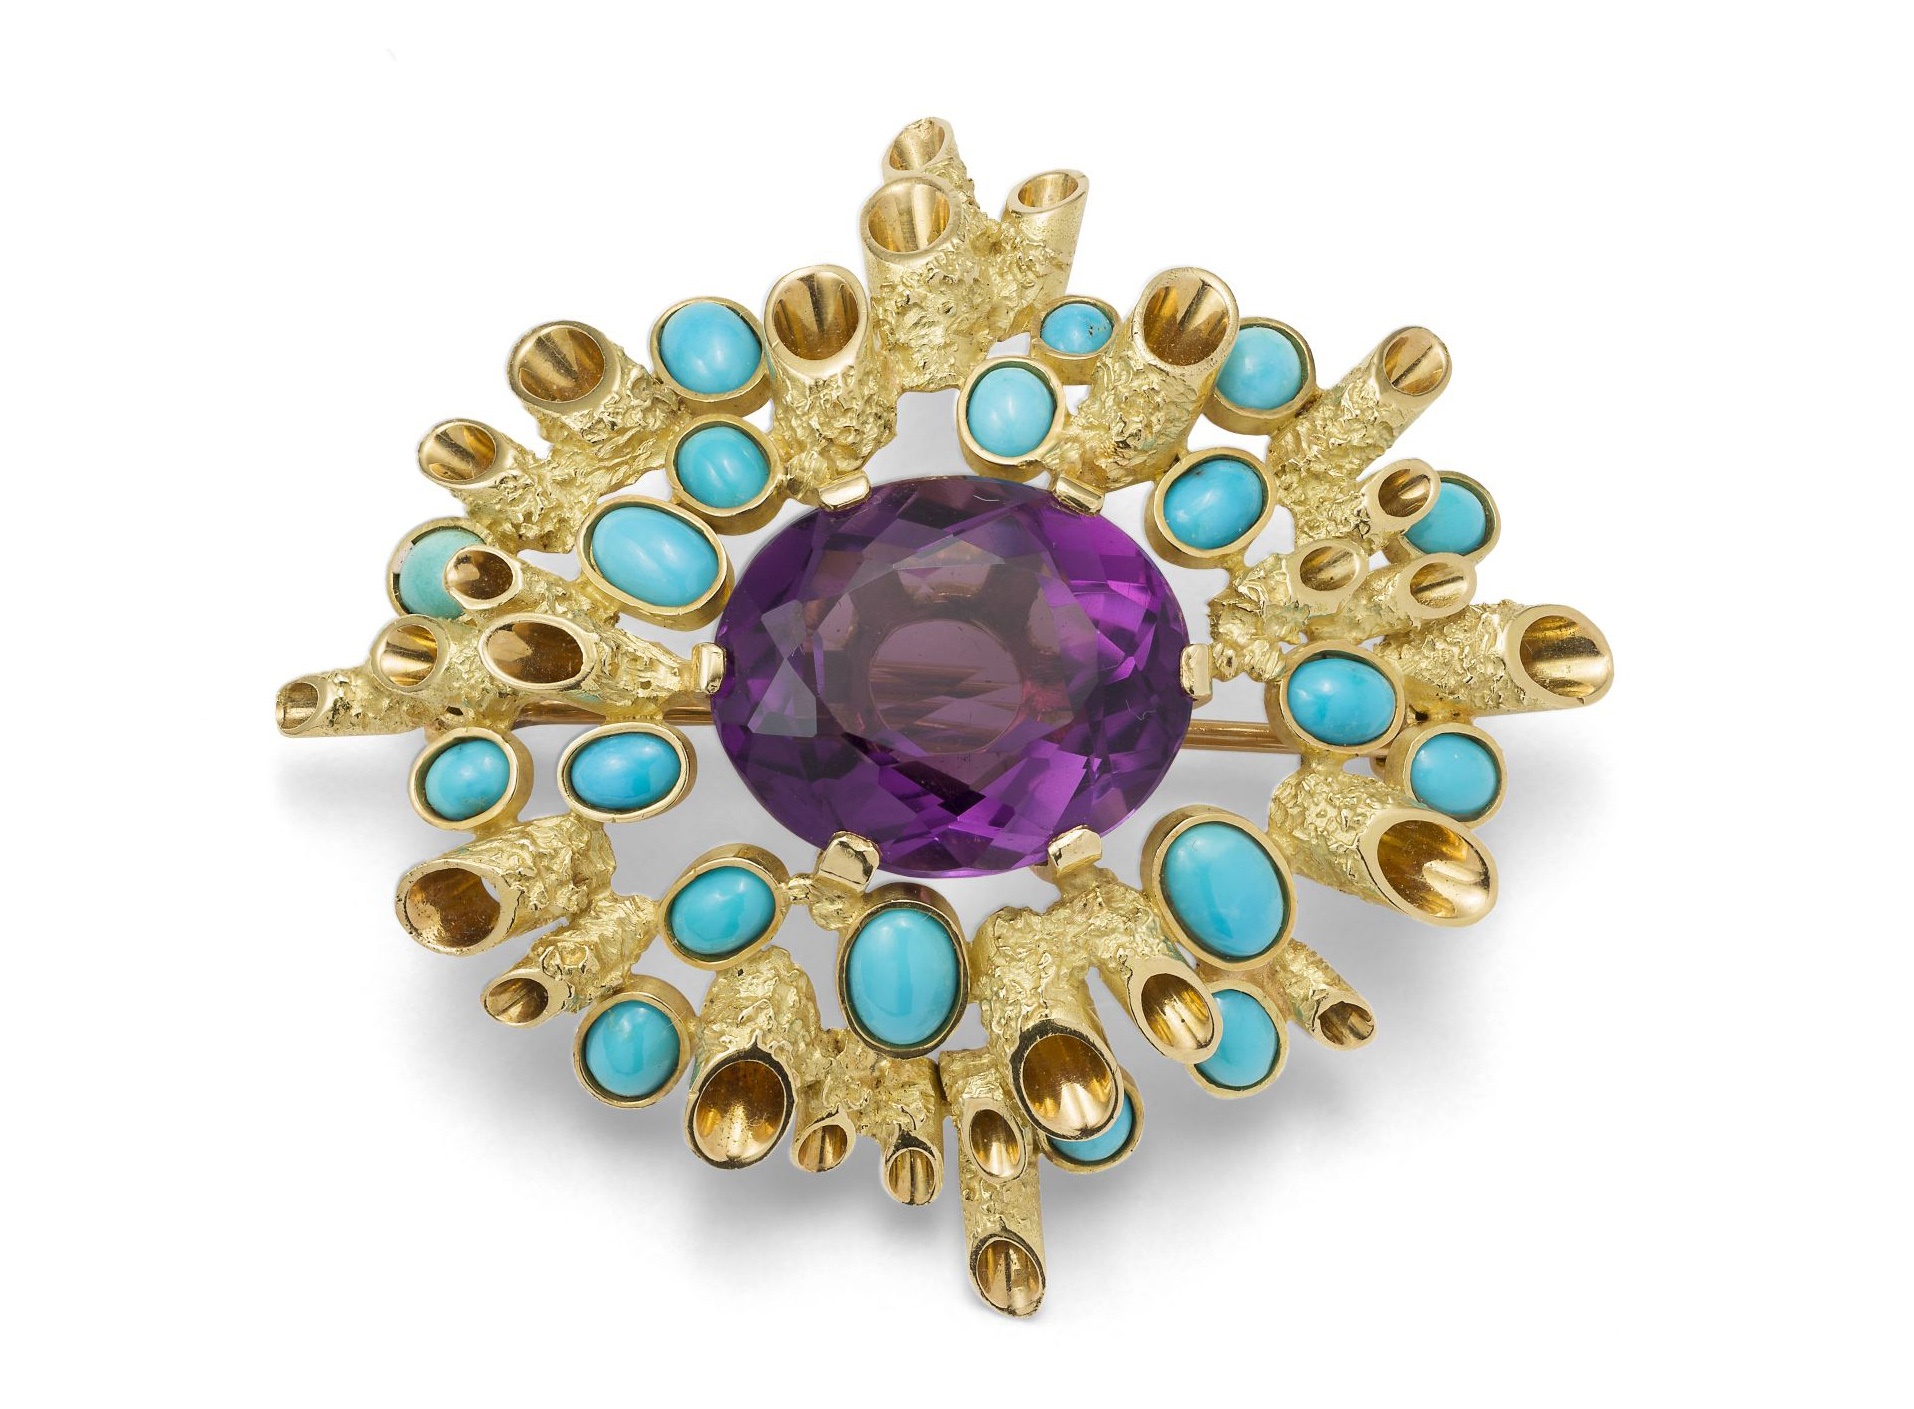 Lot 68 | An amethyst and turquoise brooch, by John Donald, 1965 | The central oval-cut amethyst, within an abstract border of radiating textured round 18ct gold tubes, accented with collet-set cabochon turquoise, UK hallmark, maker's mark JAD, maker's case | Length: 5.0cm | £1,500 - £2,000 + fees